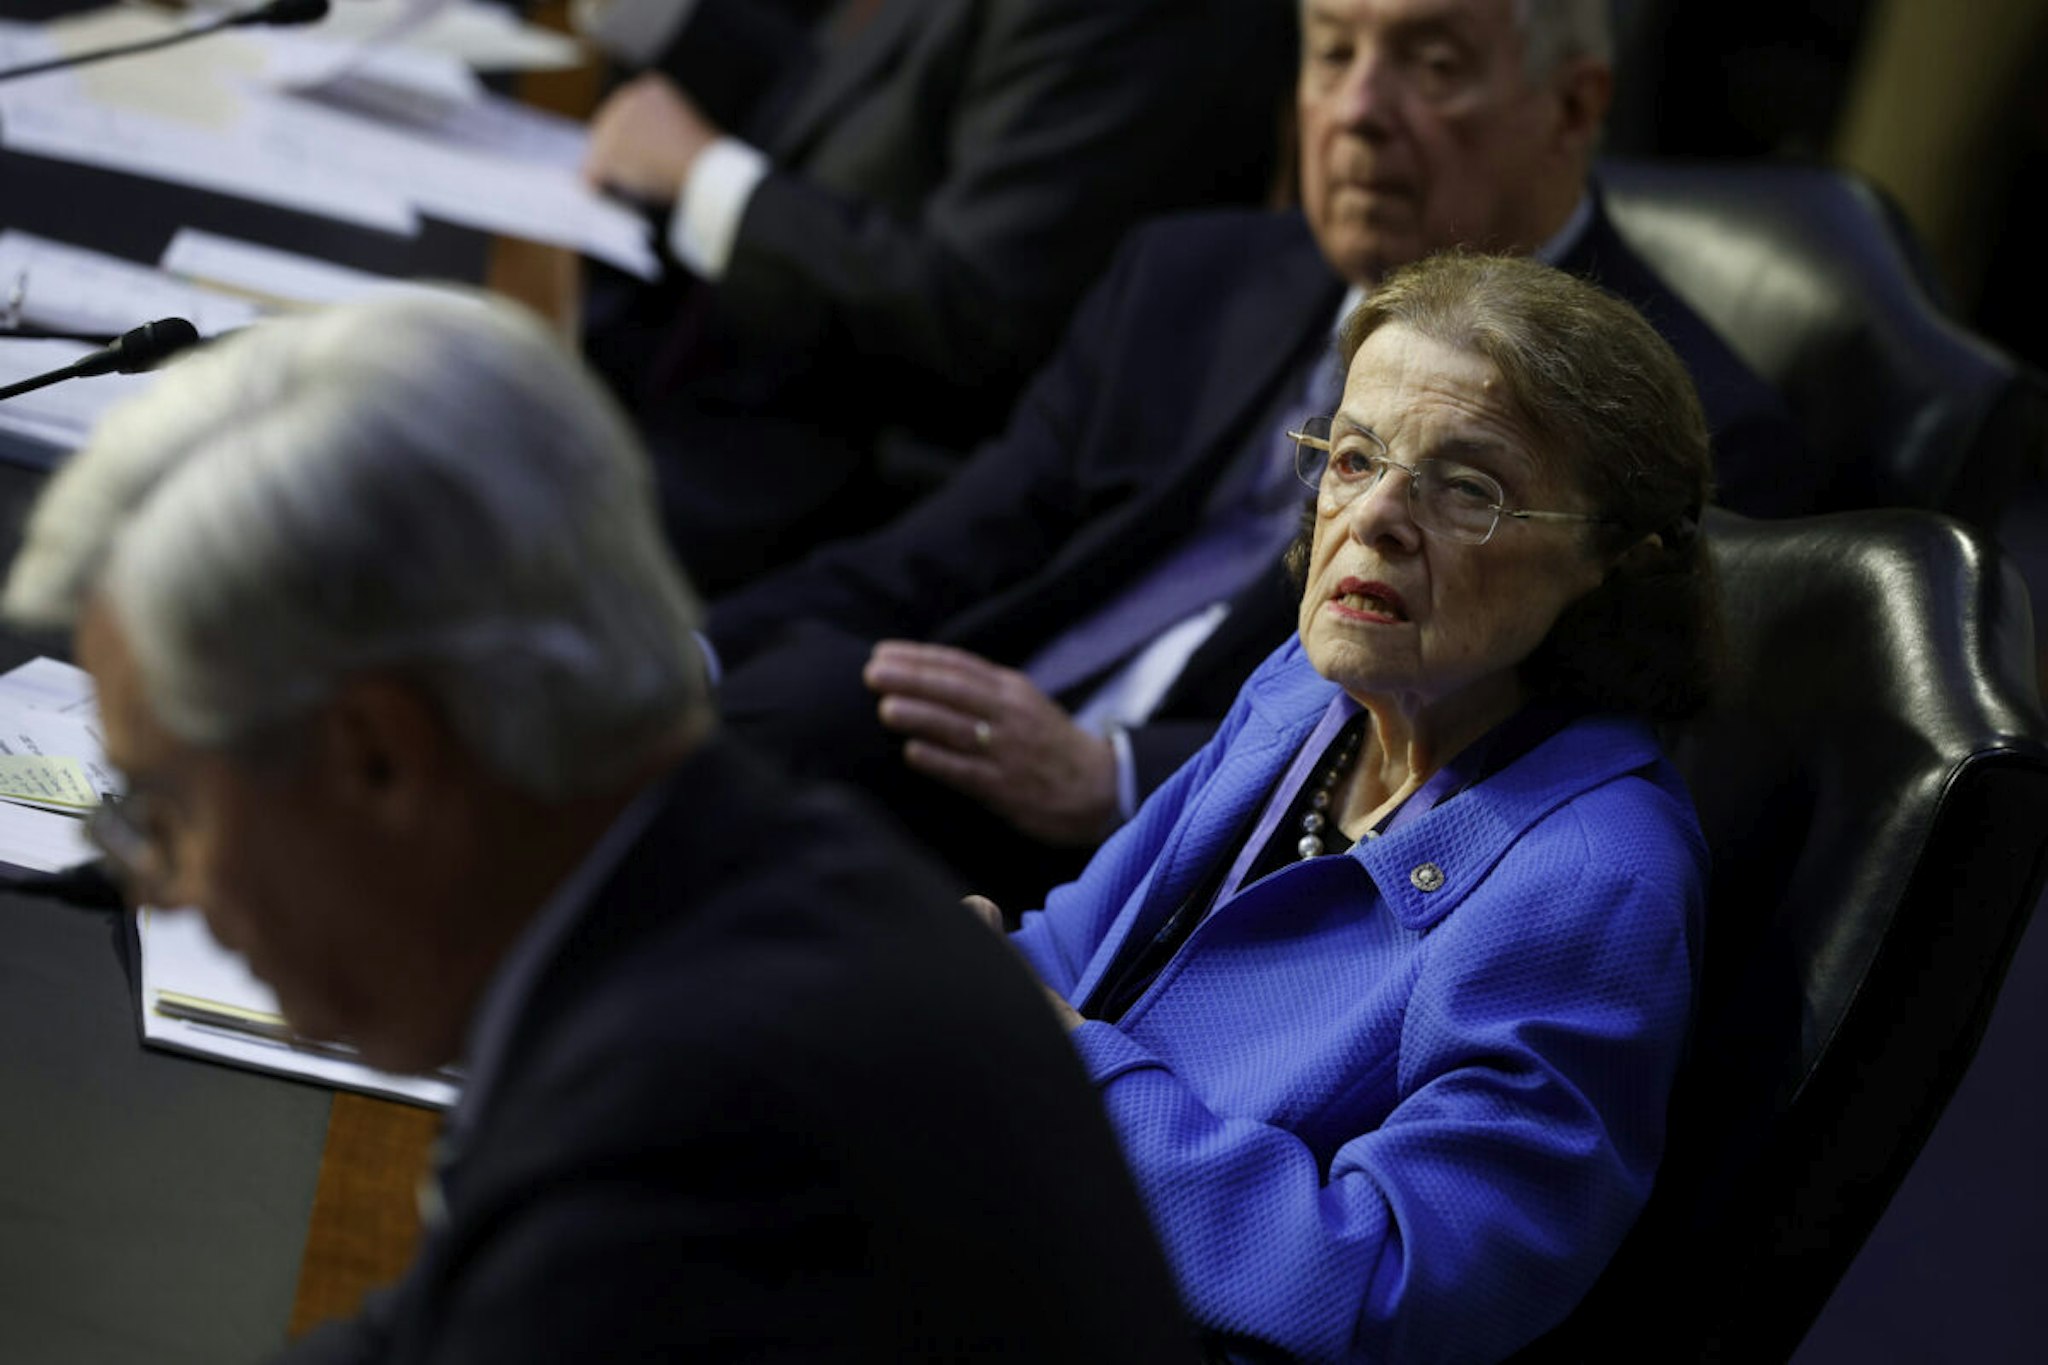 Senate Judiciary Committee member Sen. Dianne Feinstein (D-CA) (C) and Chairman Richard Durbin (D-IL) listen to debate during a committee business meeting about Supreme Court ethics reform in the Hart Senate Office Building on Capitol Hill on July 20, 2023 in Washington, DC.